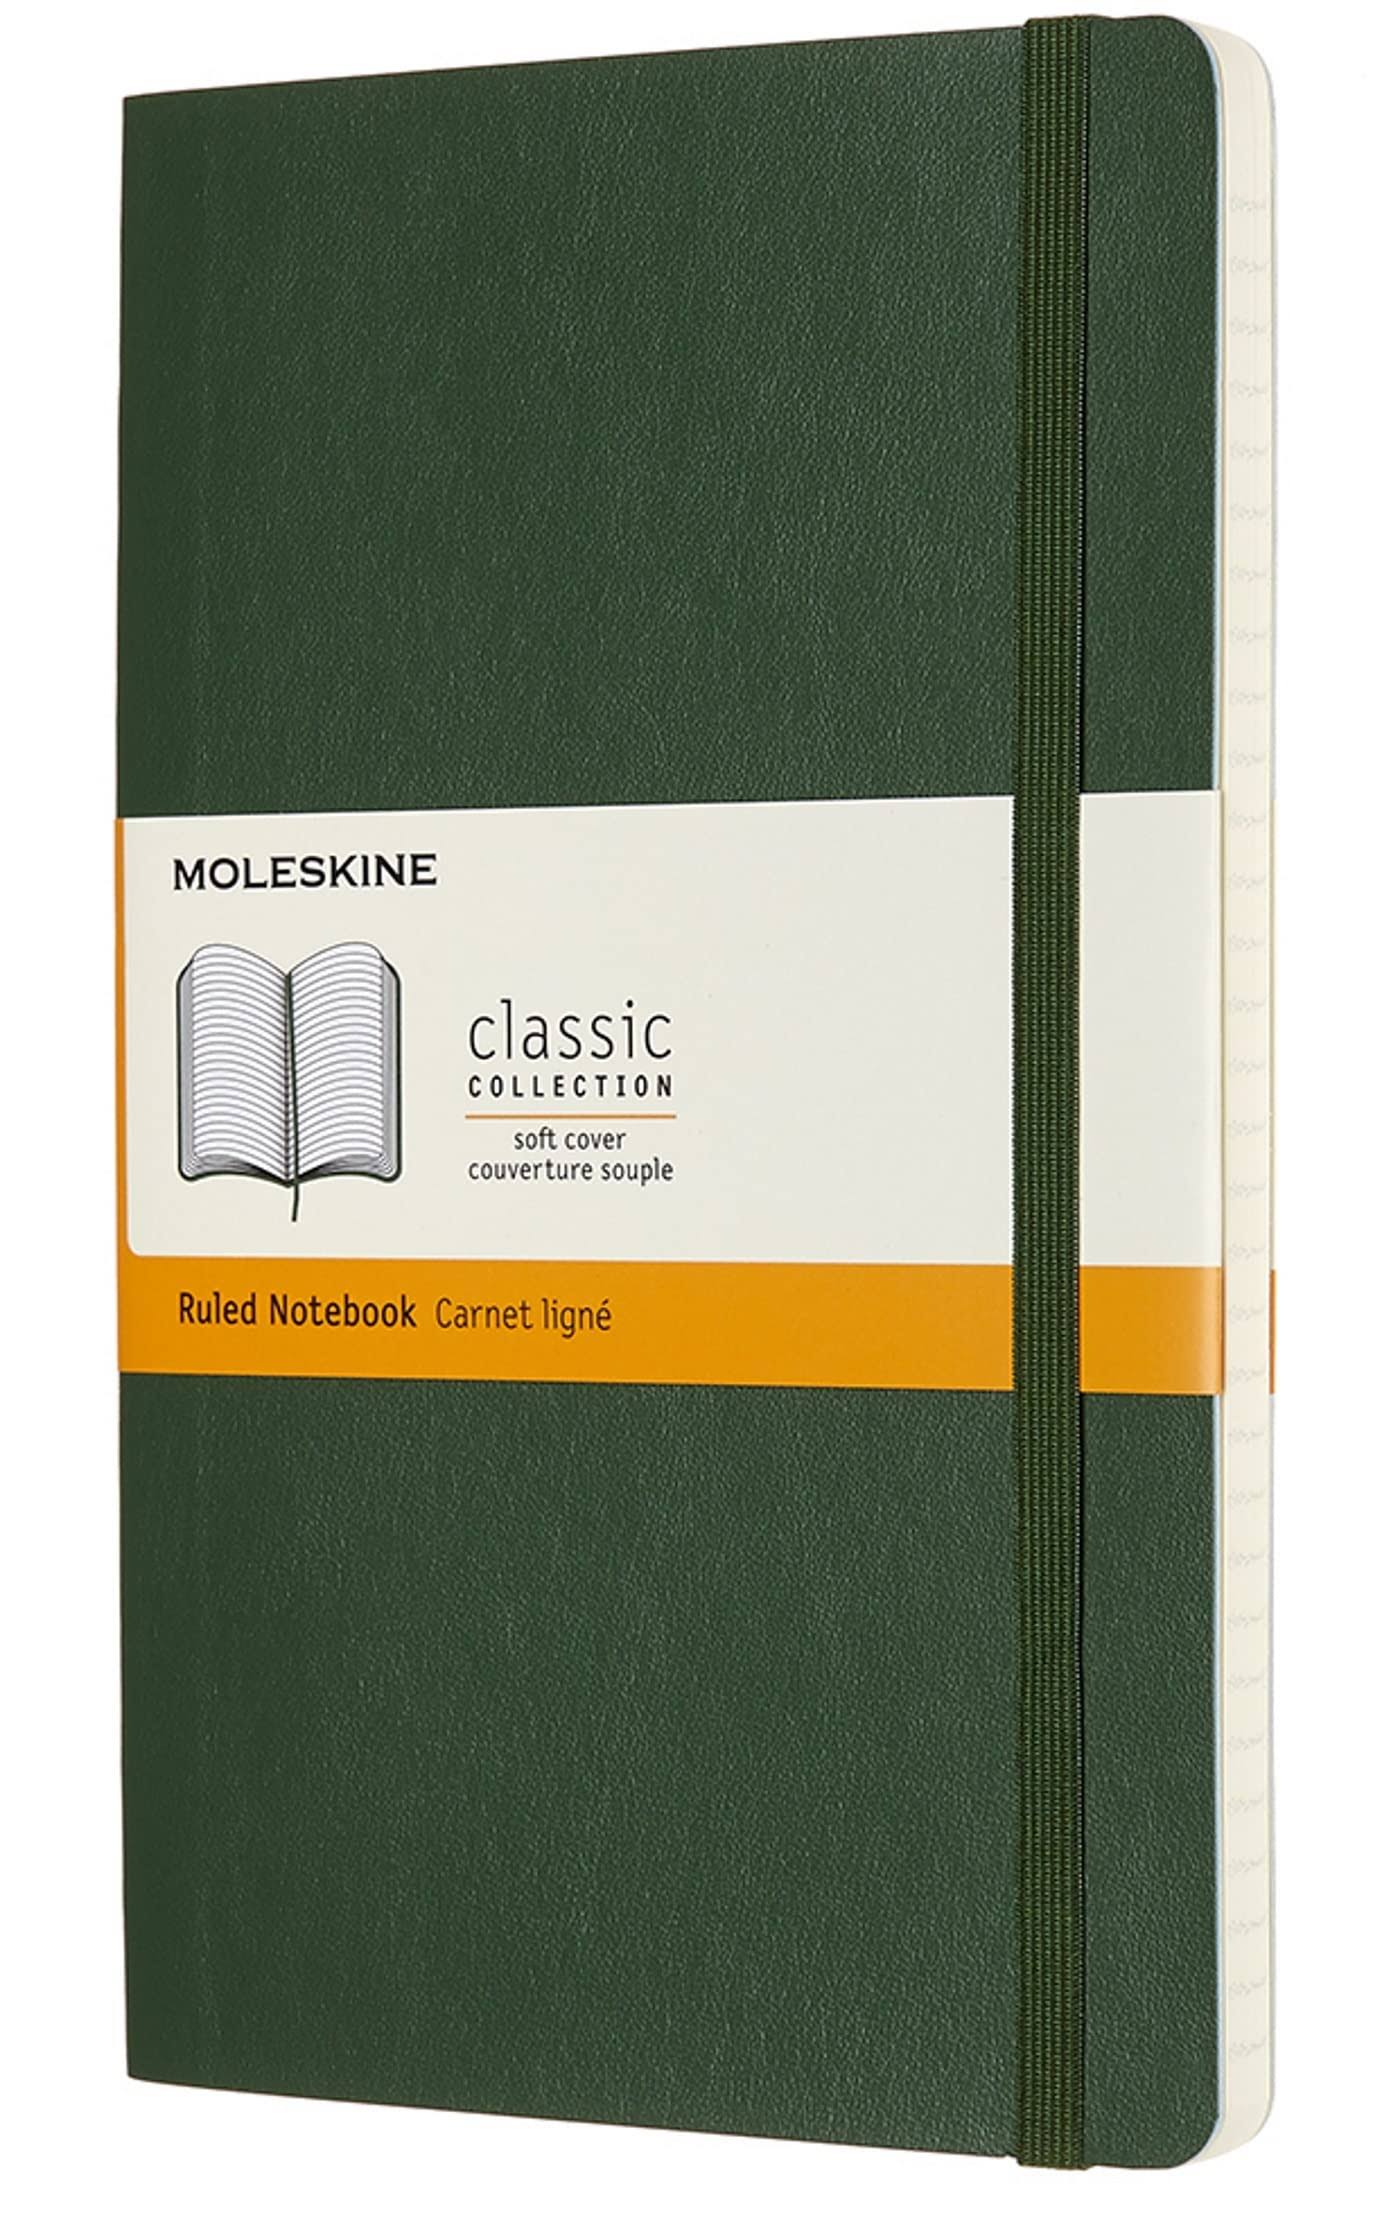 Moleskine - Classic Soft Cover Notebook - Large Myrtle Green / Ruled